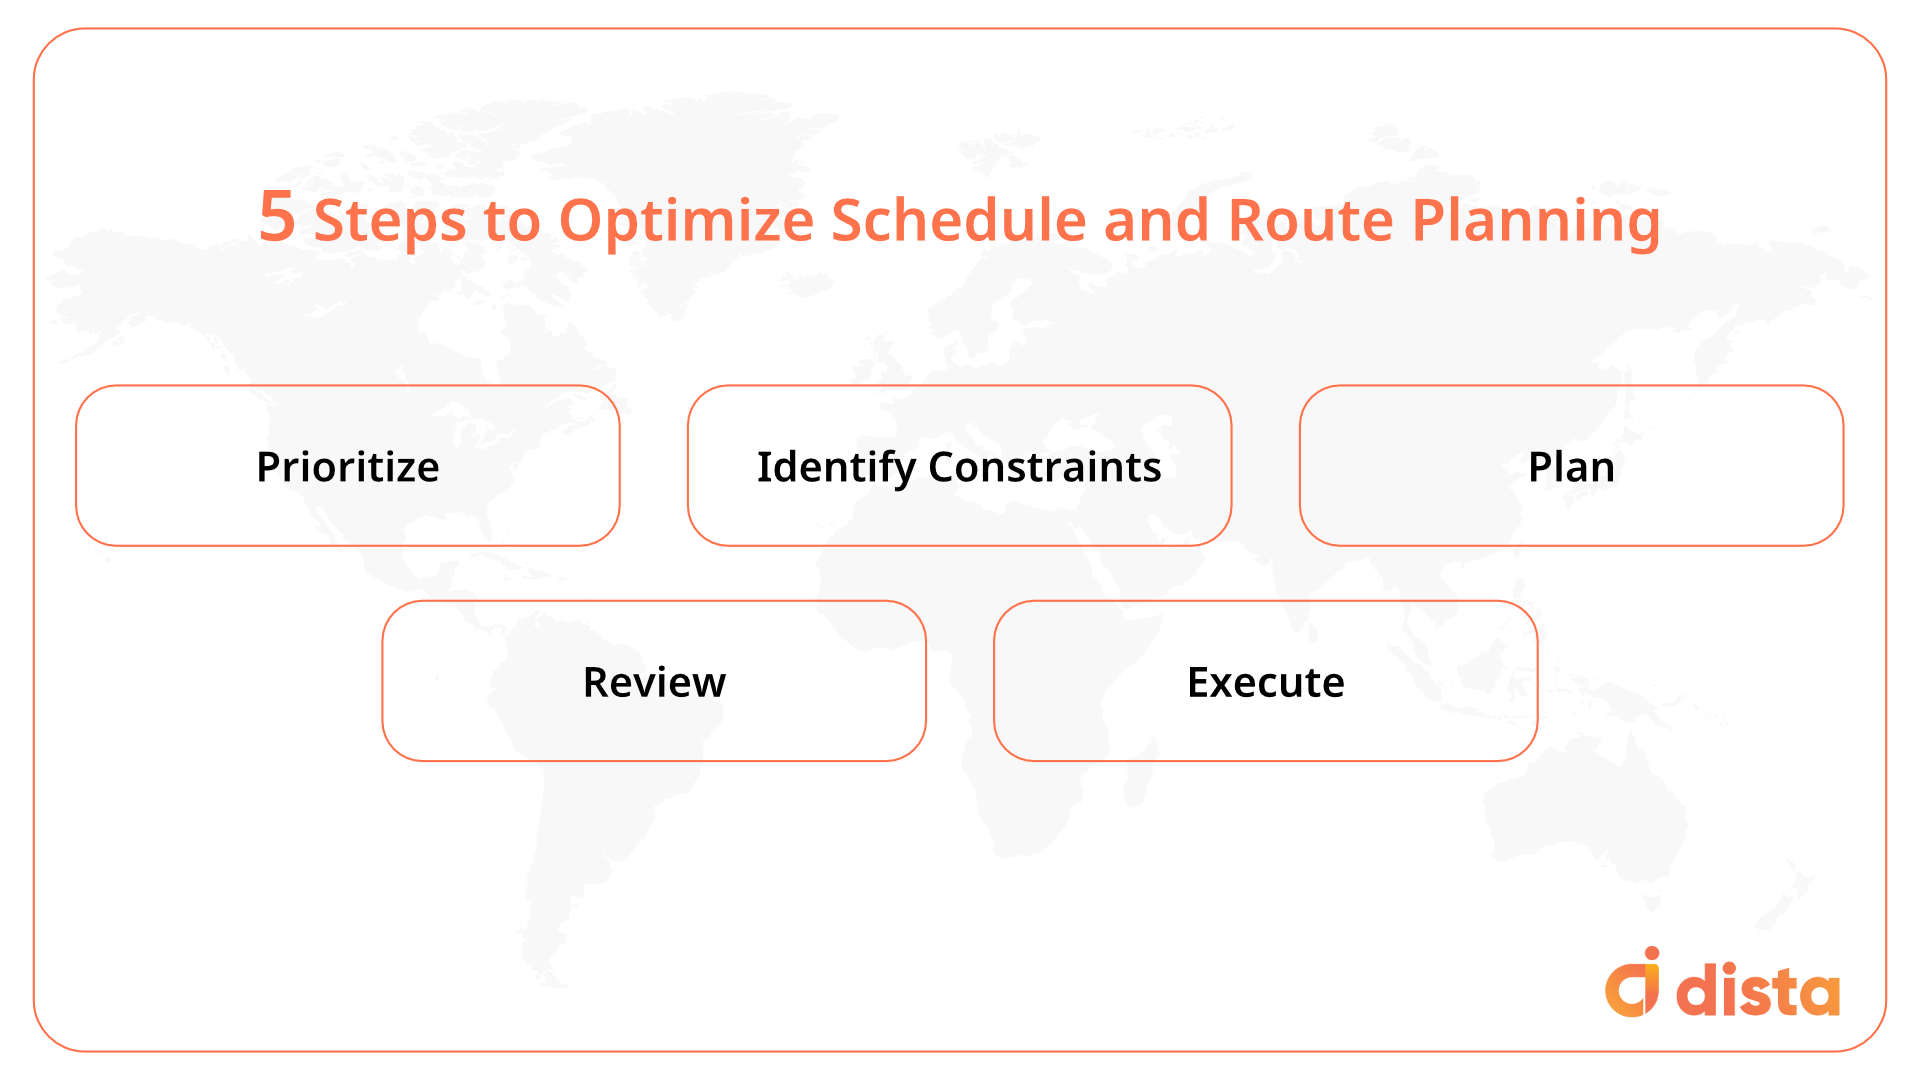 5 Steps to Optimize Schedule and Route Planning